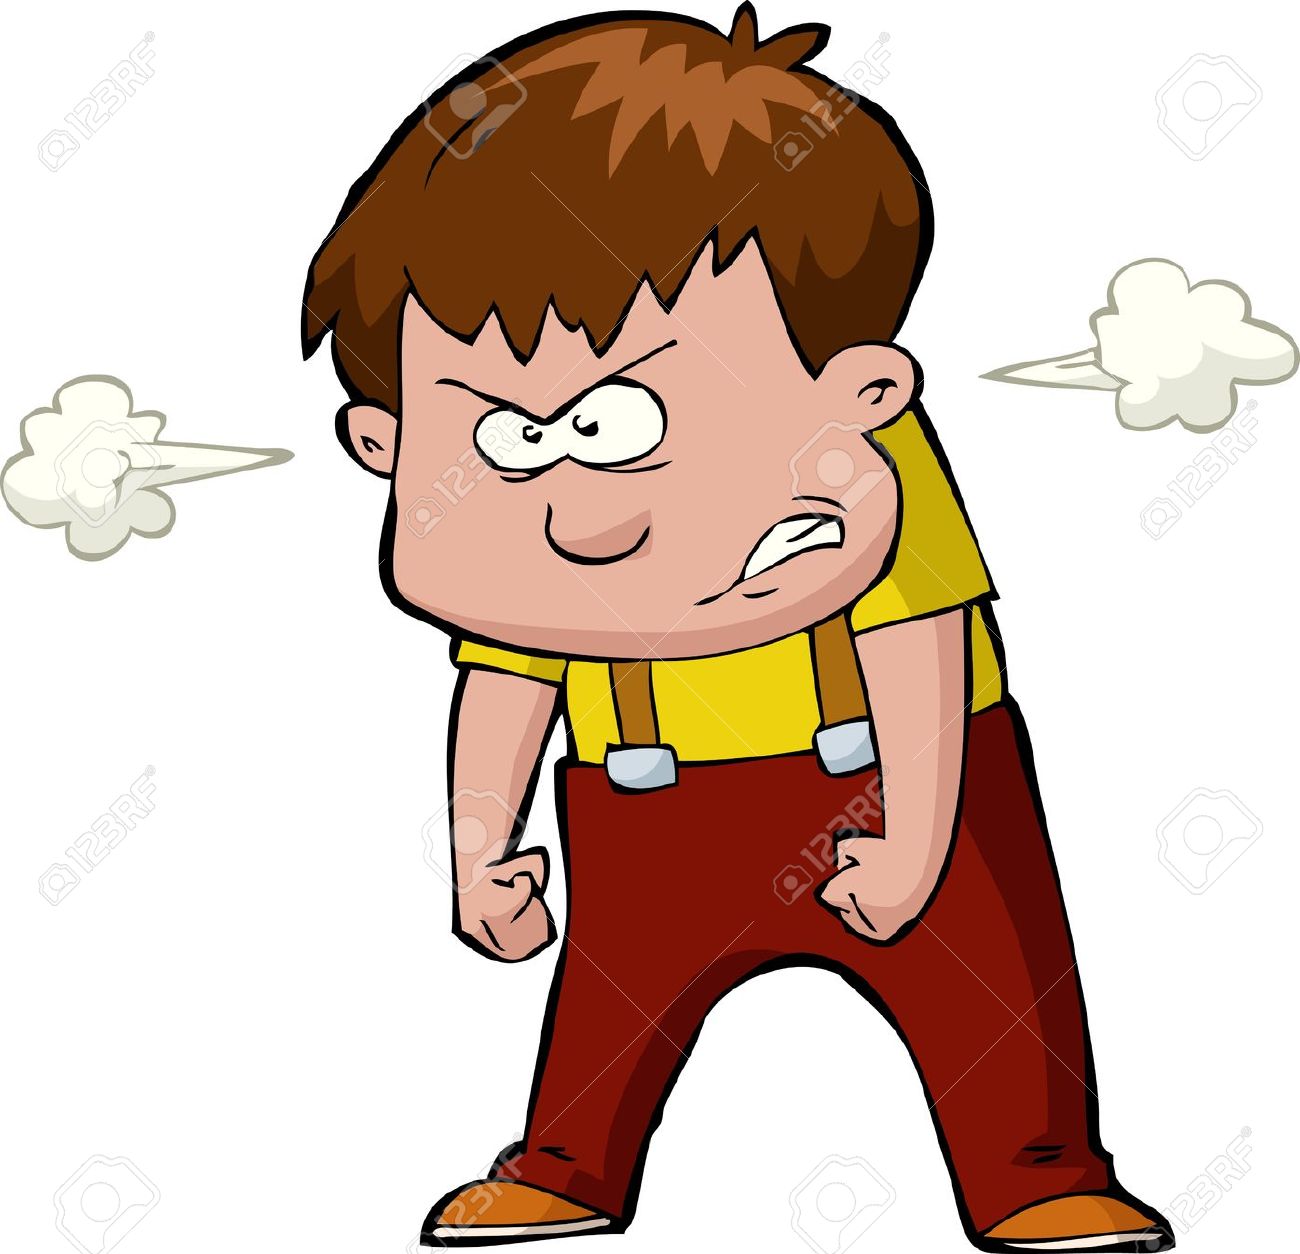 Anger clipart #11, Download drawings